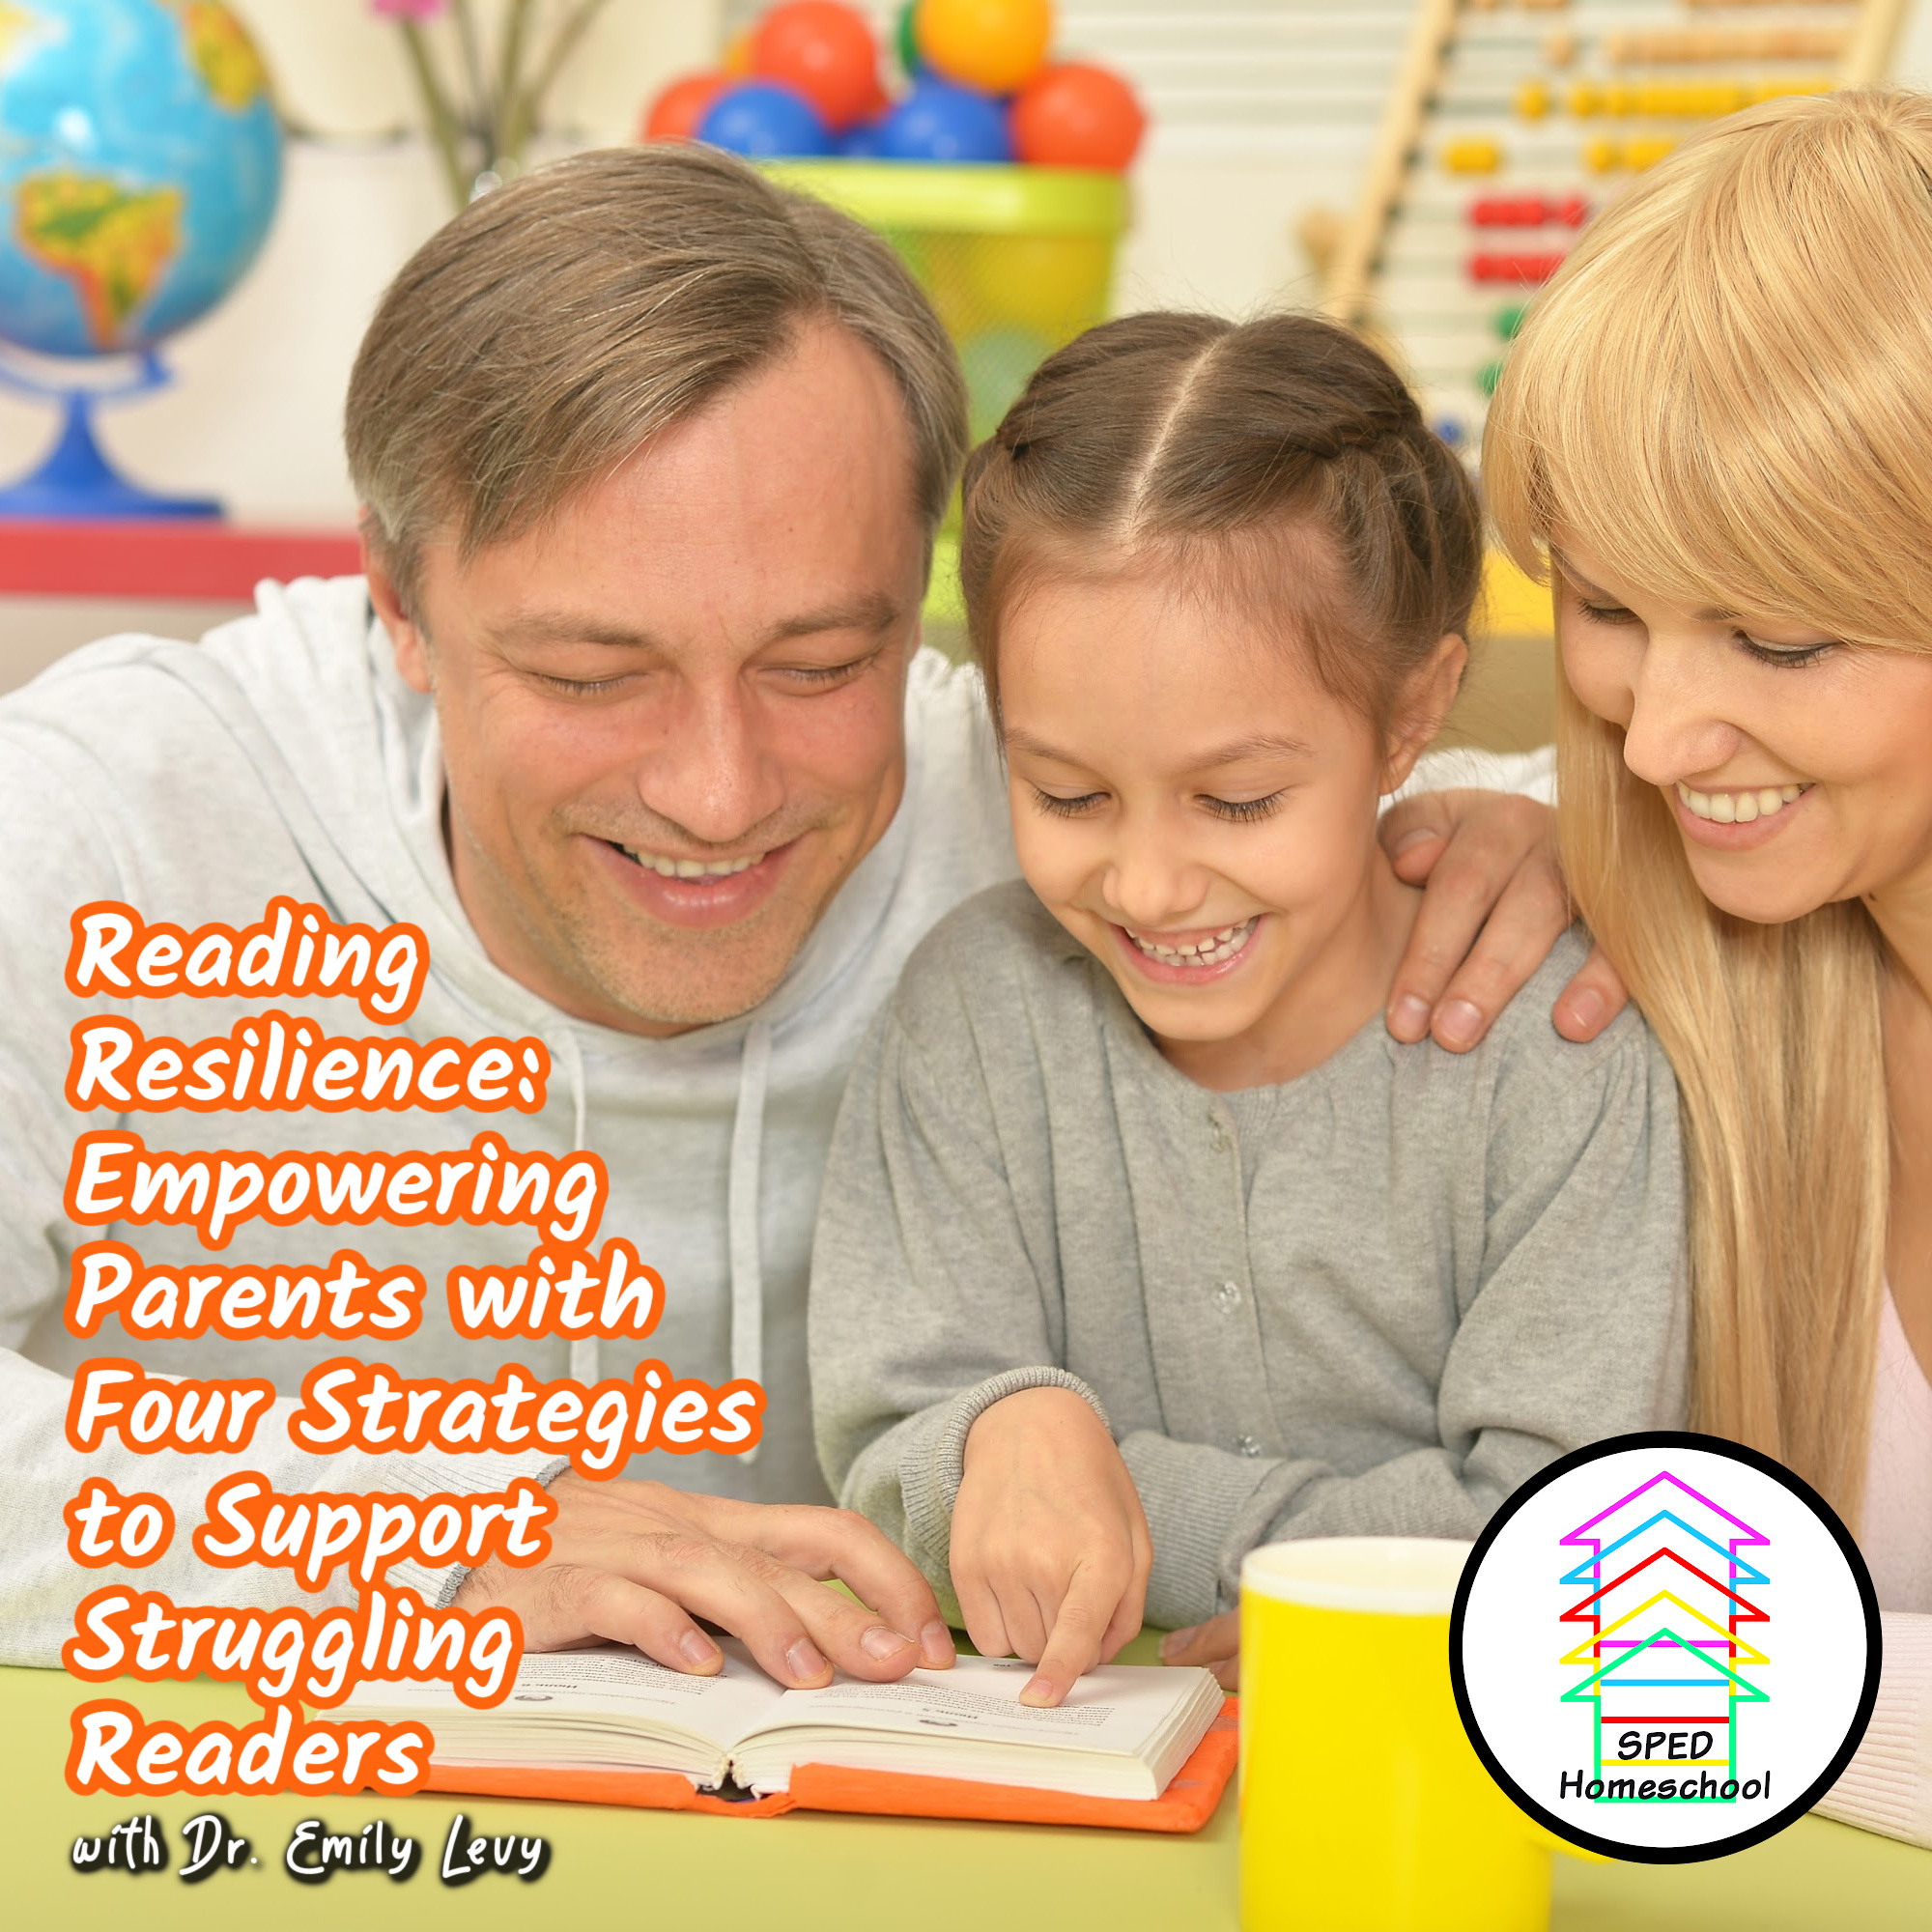 Reading Resilience: Empowering Parents with Four Strategies to Support Struggling Readers